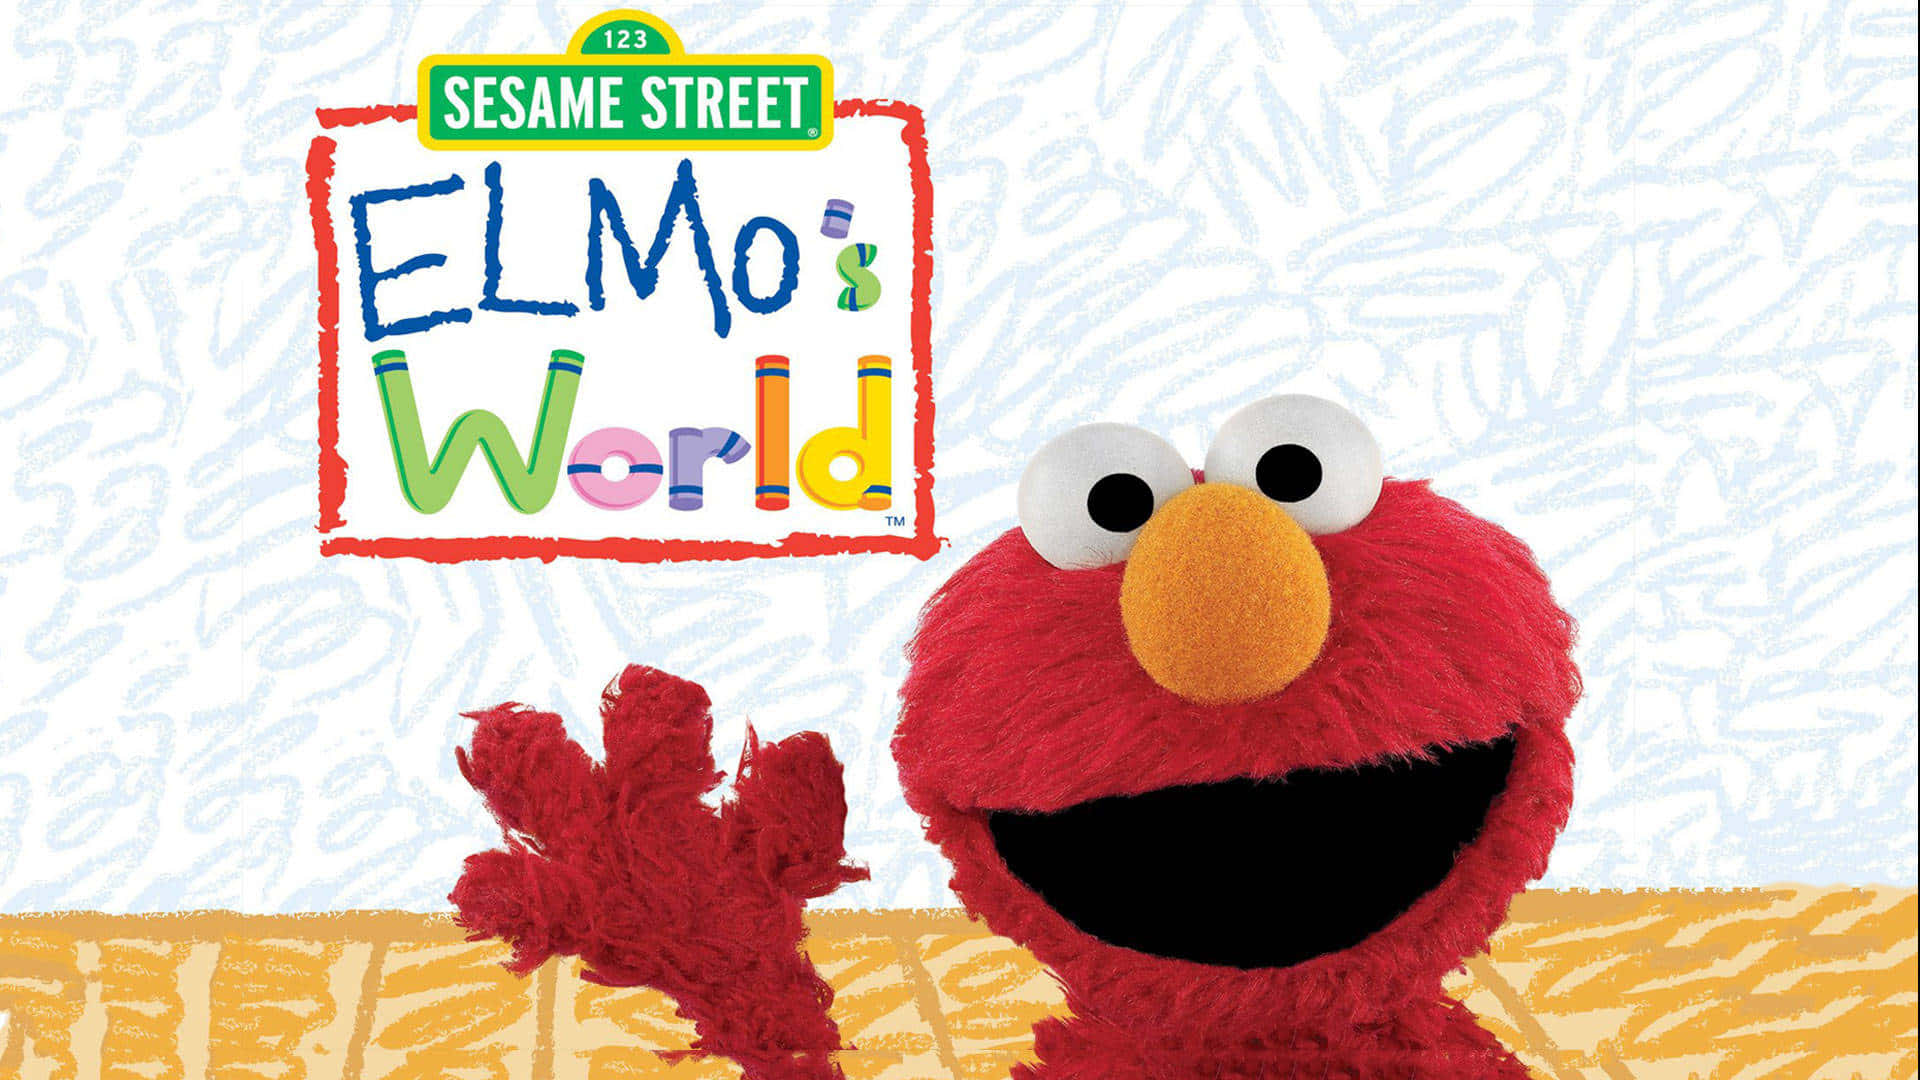 Welcome to Elmo's World